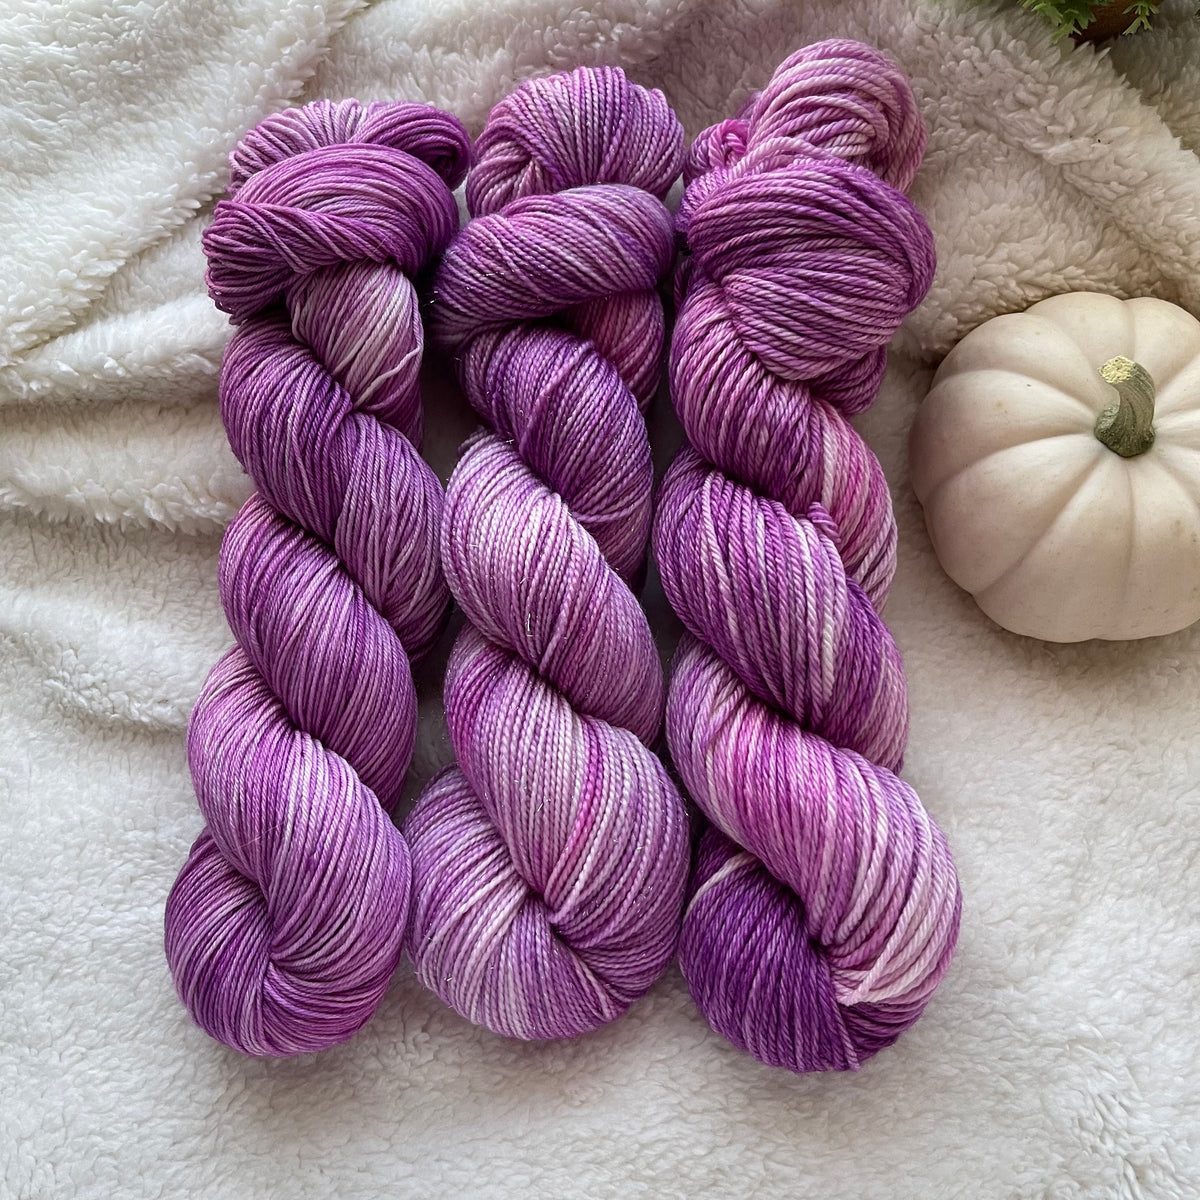 BEAUTYBERRY  -Dyed to Order - Hand Dyed Yarn Skein